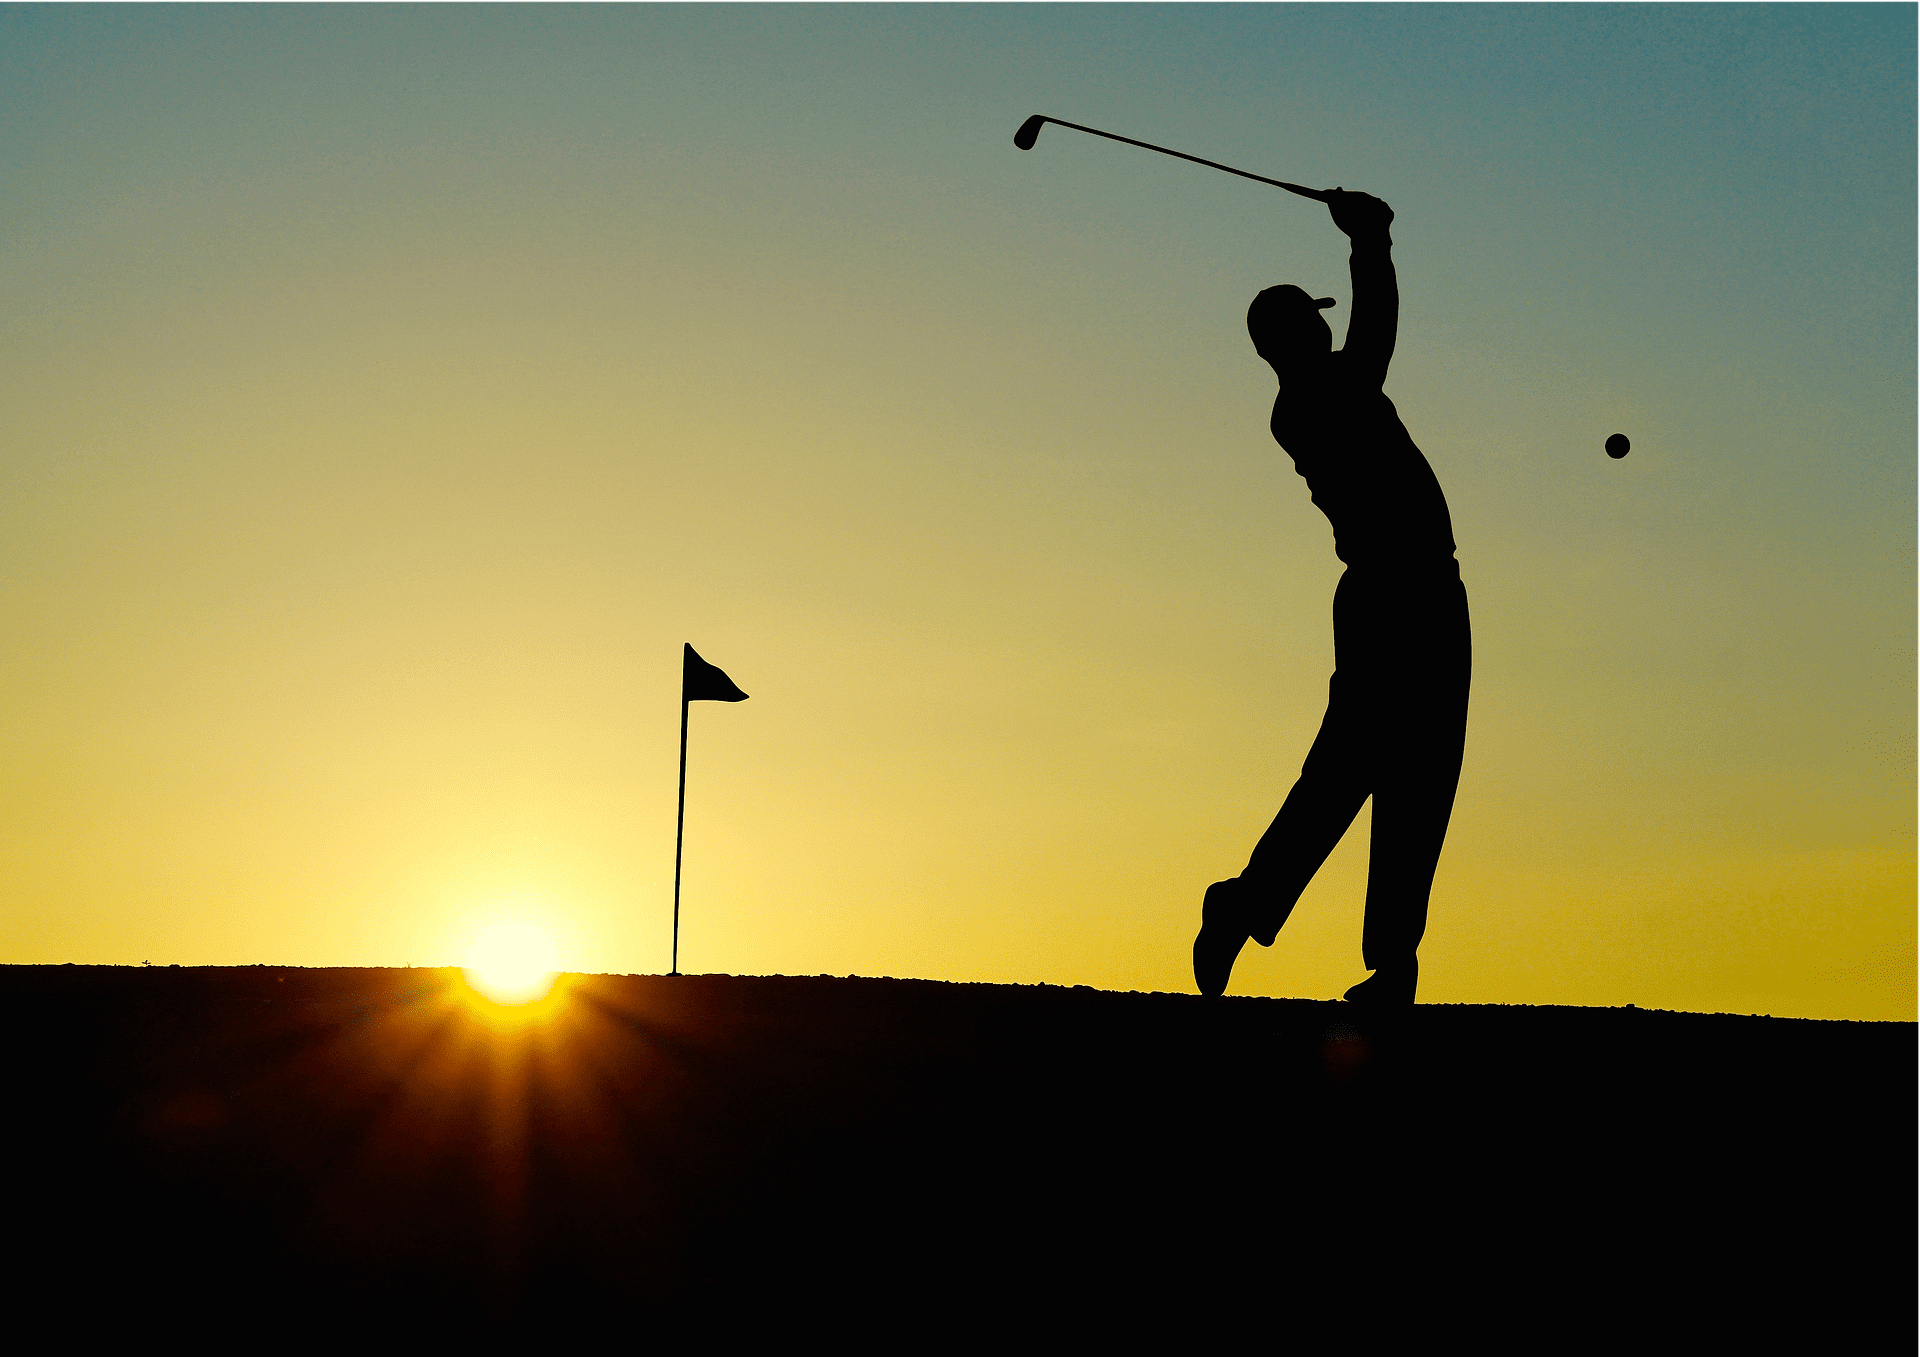 Will he ever get it in the hole? | Photo: Pixabay/Hebi B.